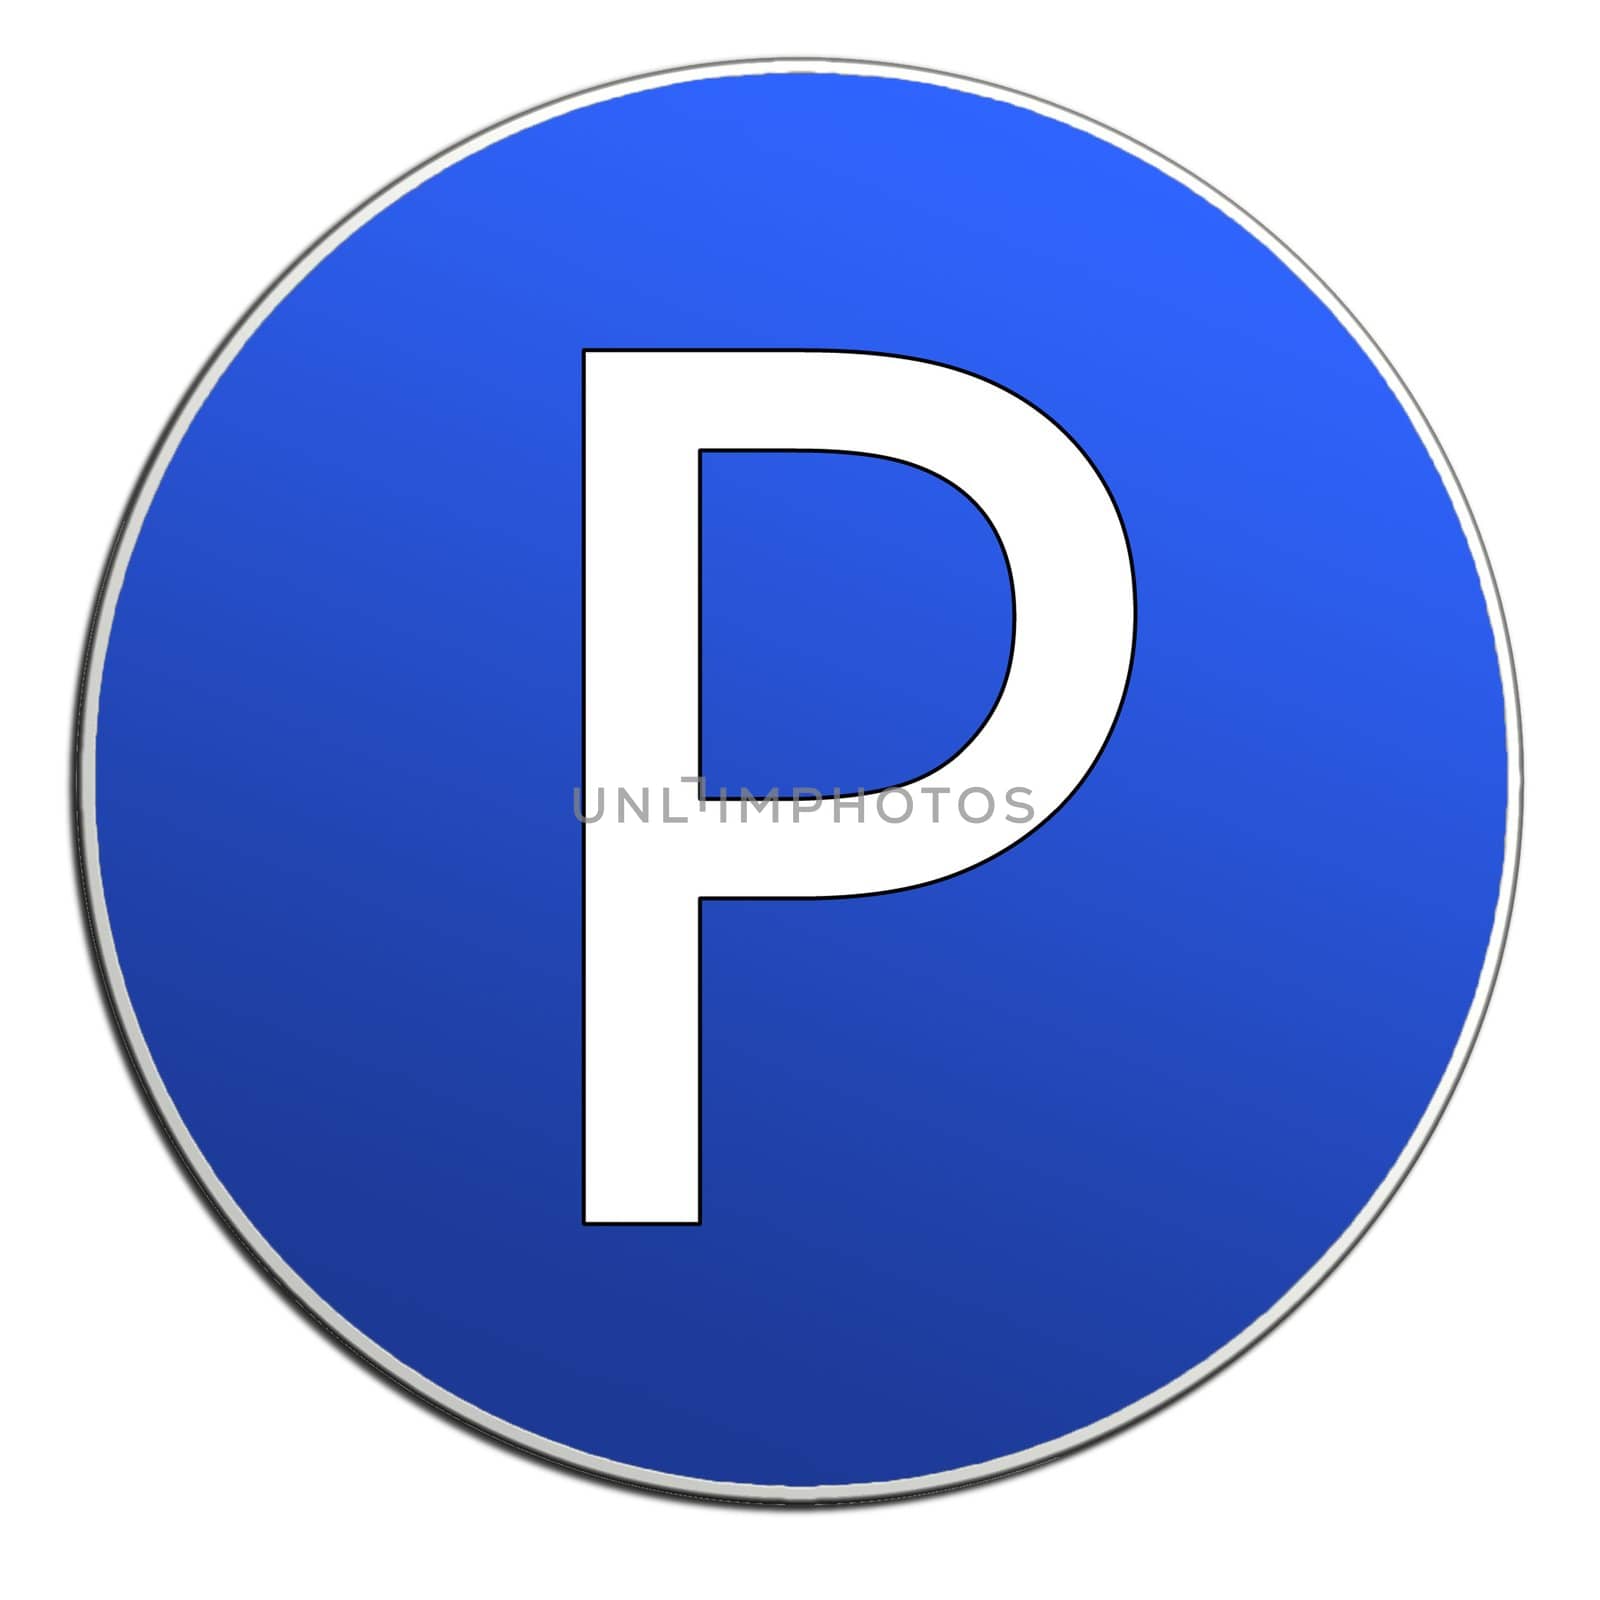 Illustration of cars parking sign isolated on white